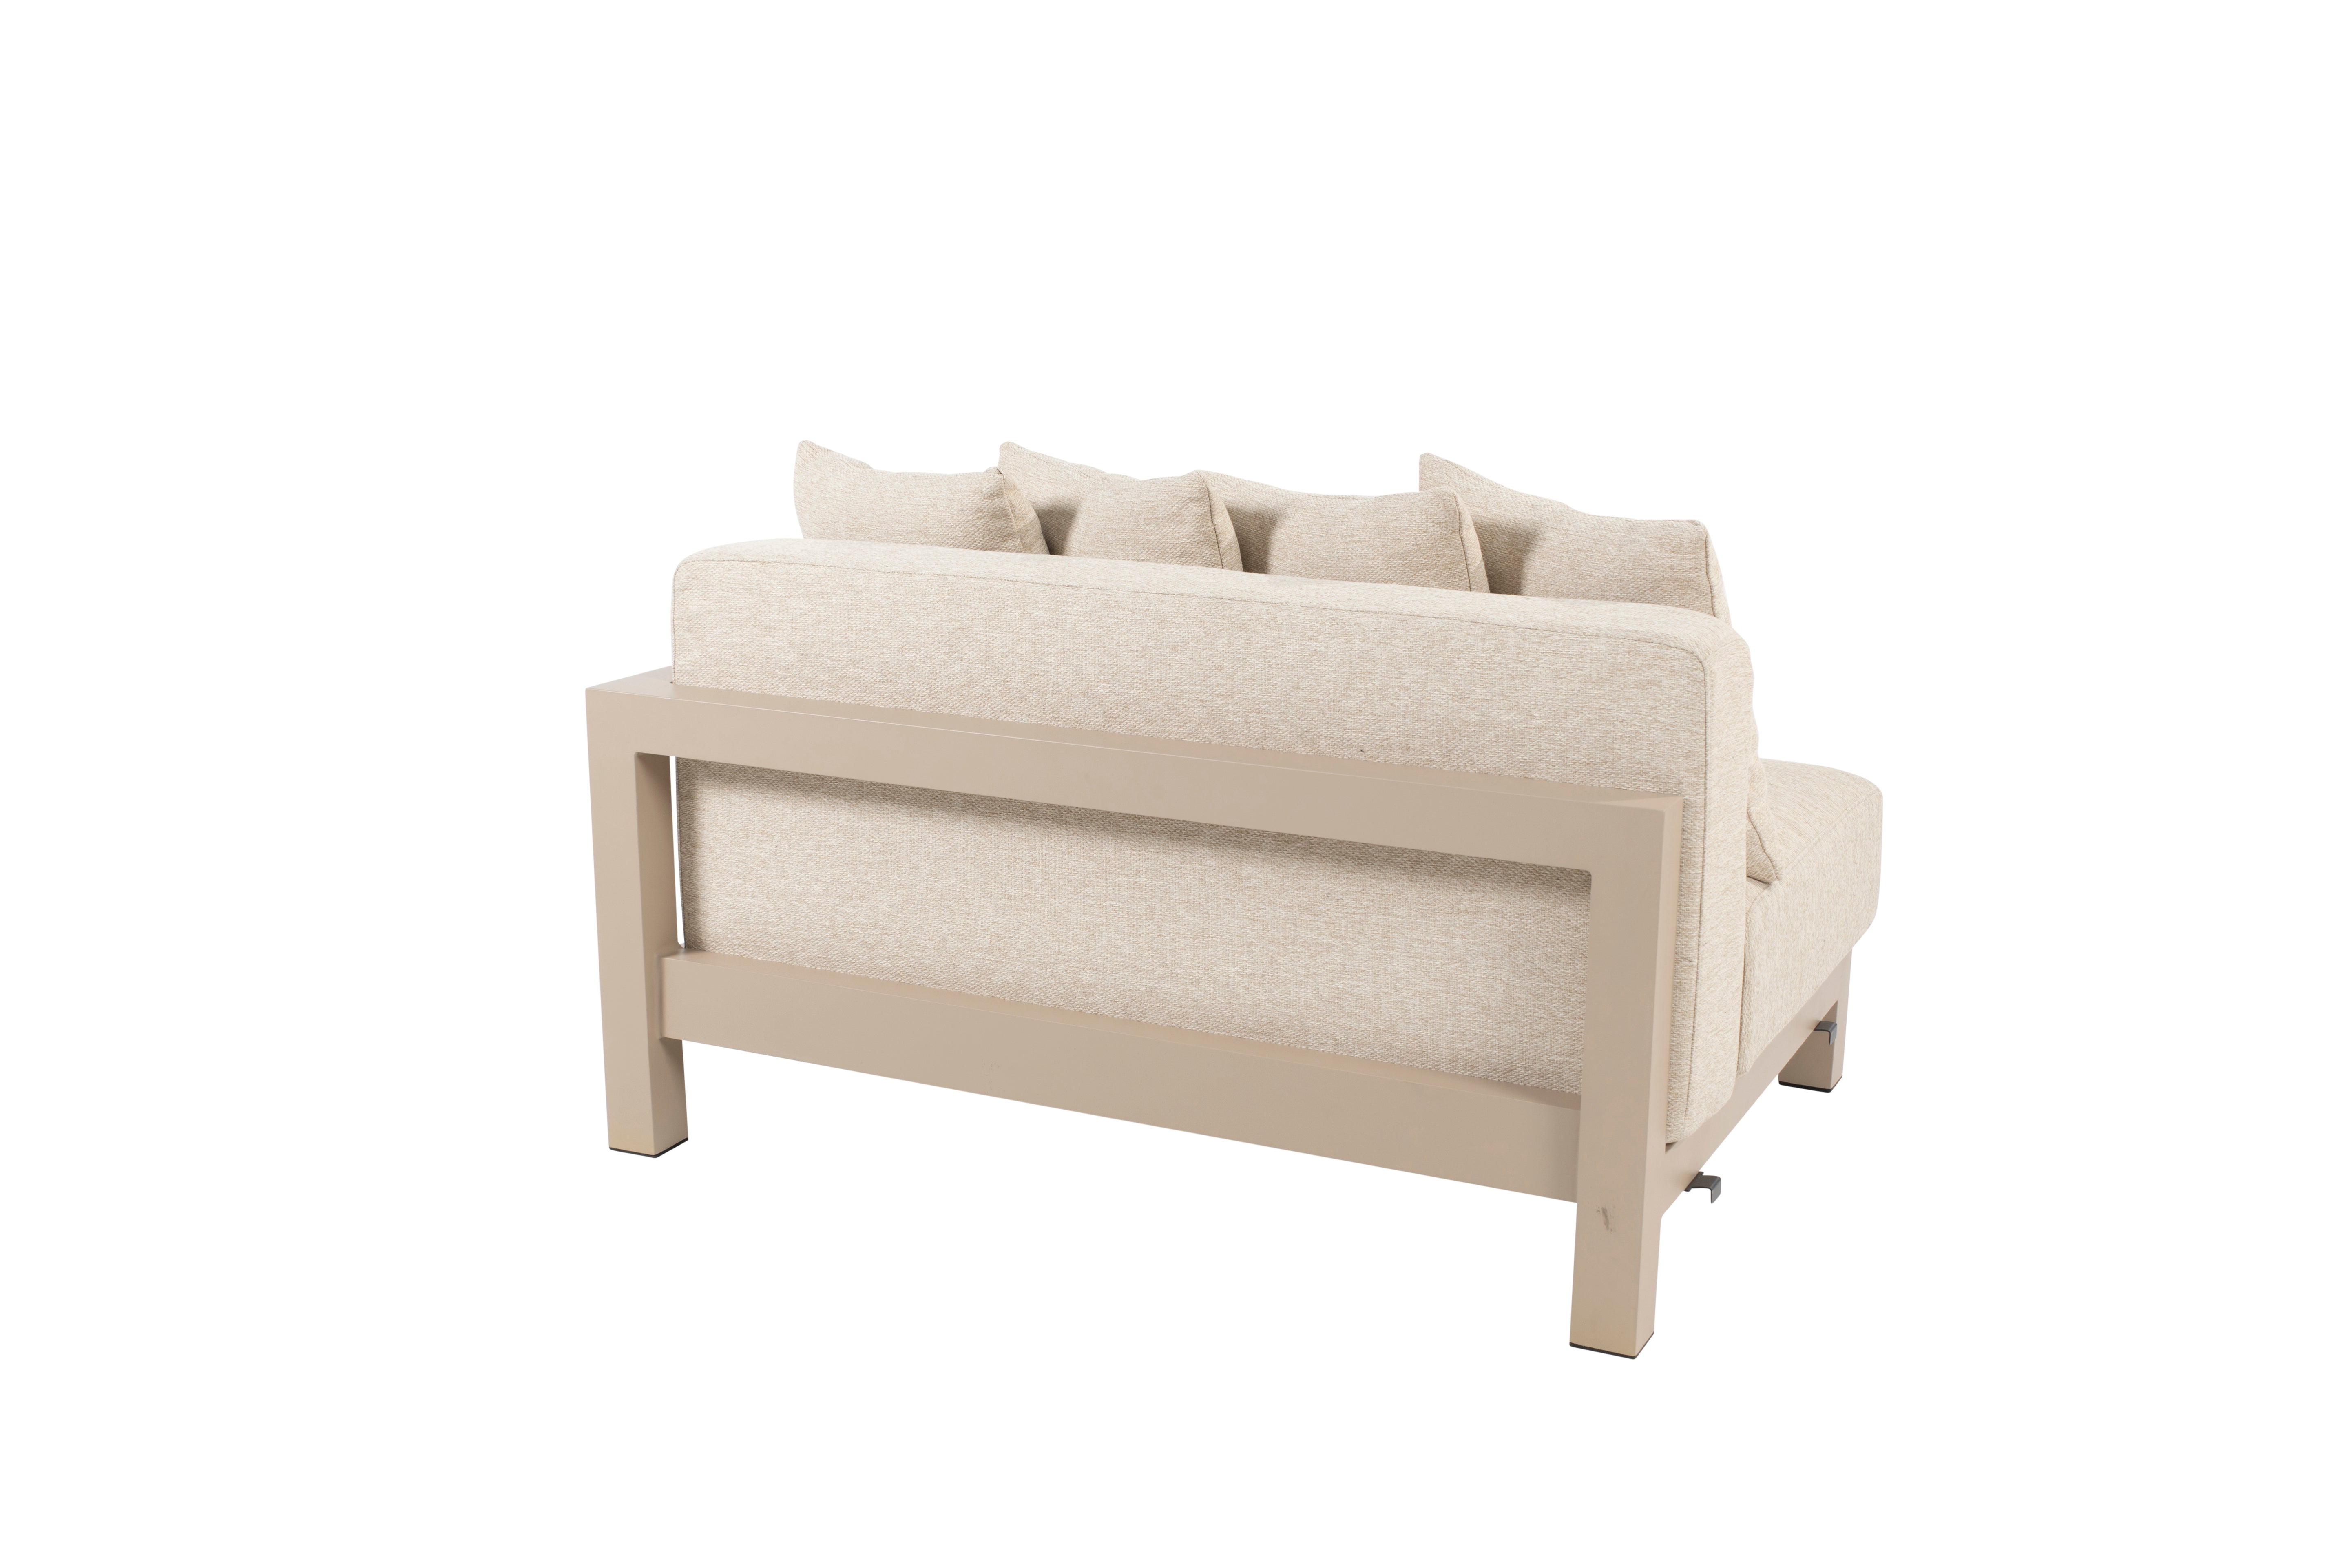 4 Seasons Outdoor Raffinato Living Bench 1.5 Seater Left Latte With 6 Cushions (2 Per Box)